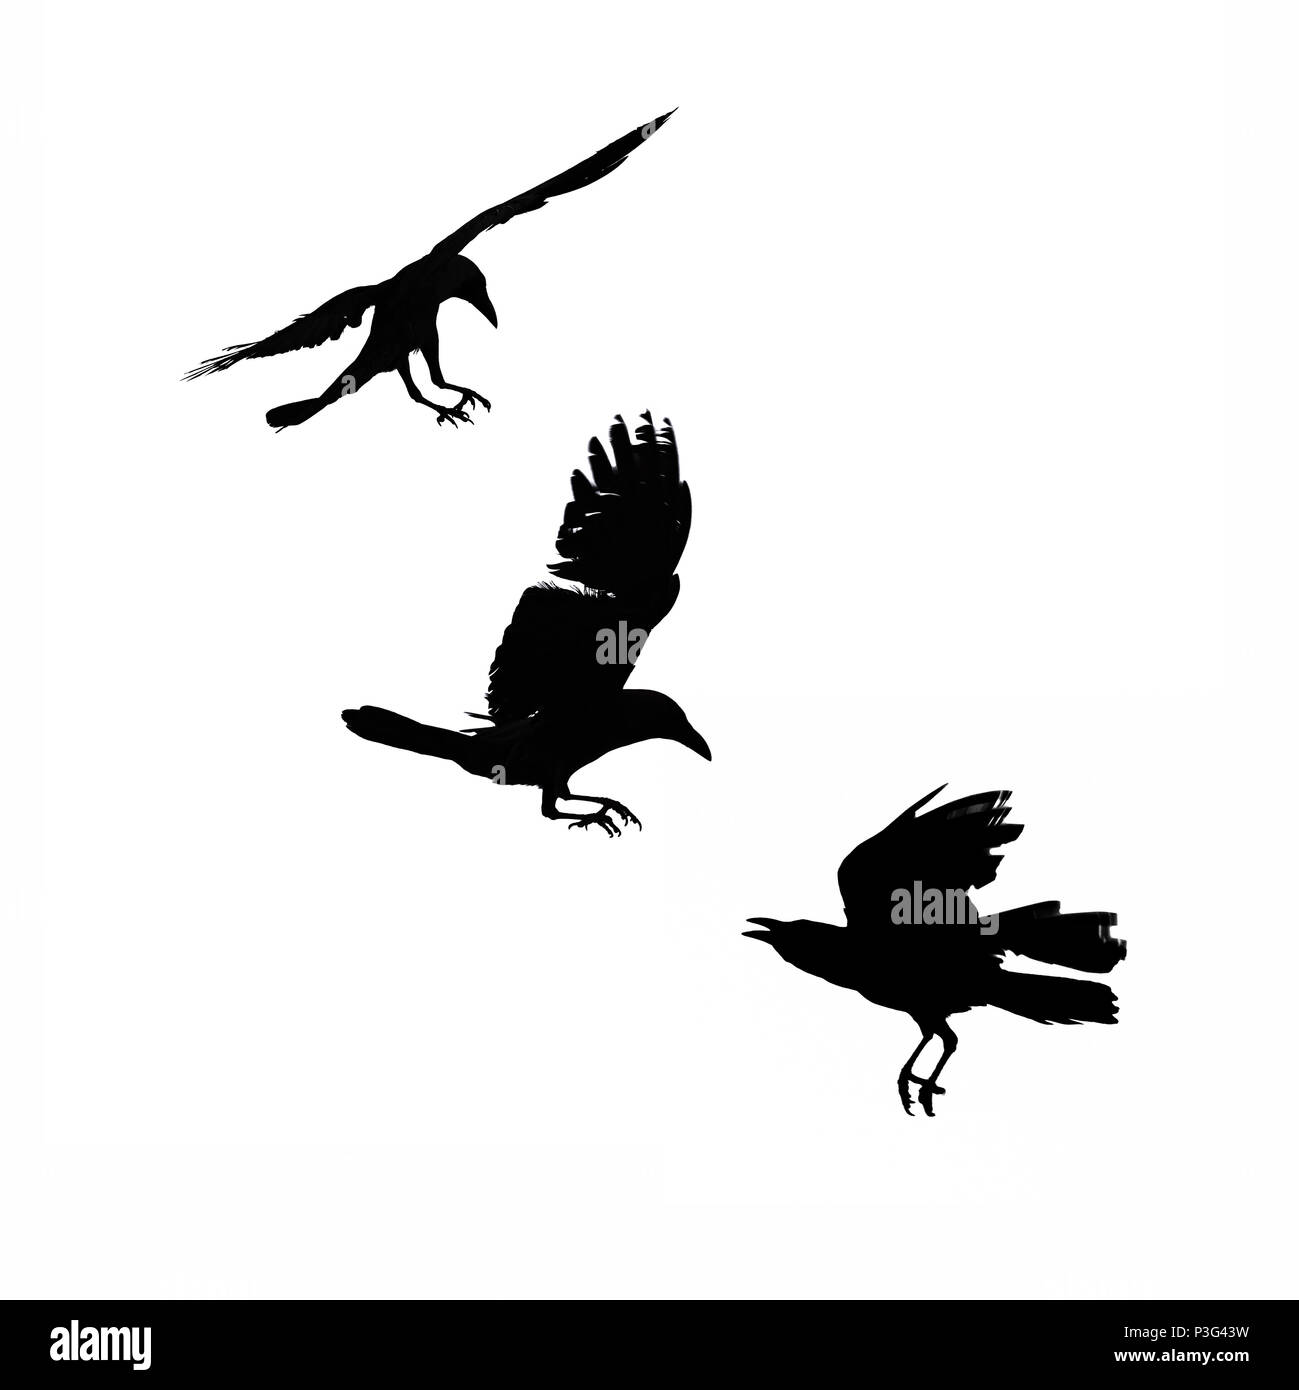 Three flying crows, silhouette isolated on white background Stock Photo